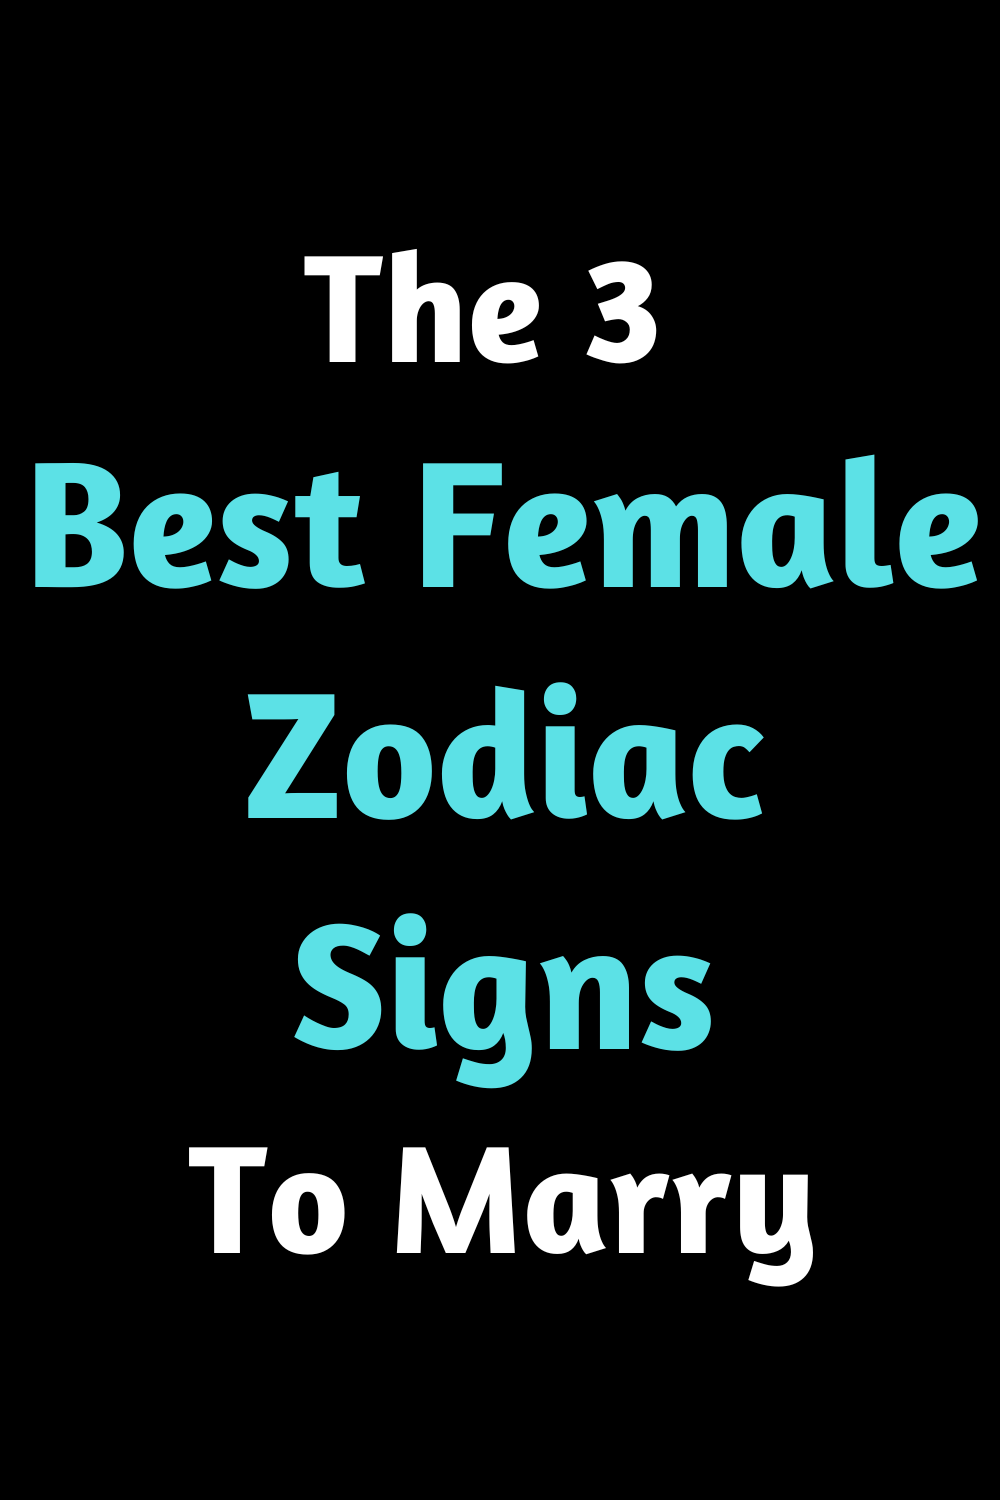 The 3 Best Female Zodiac Signs To Marry